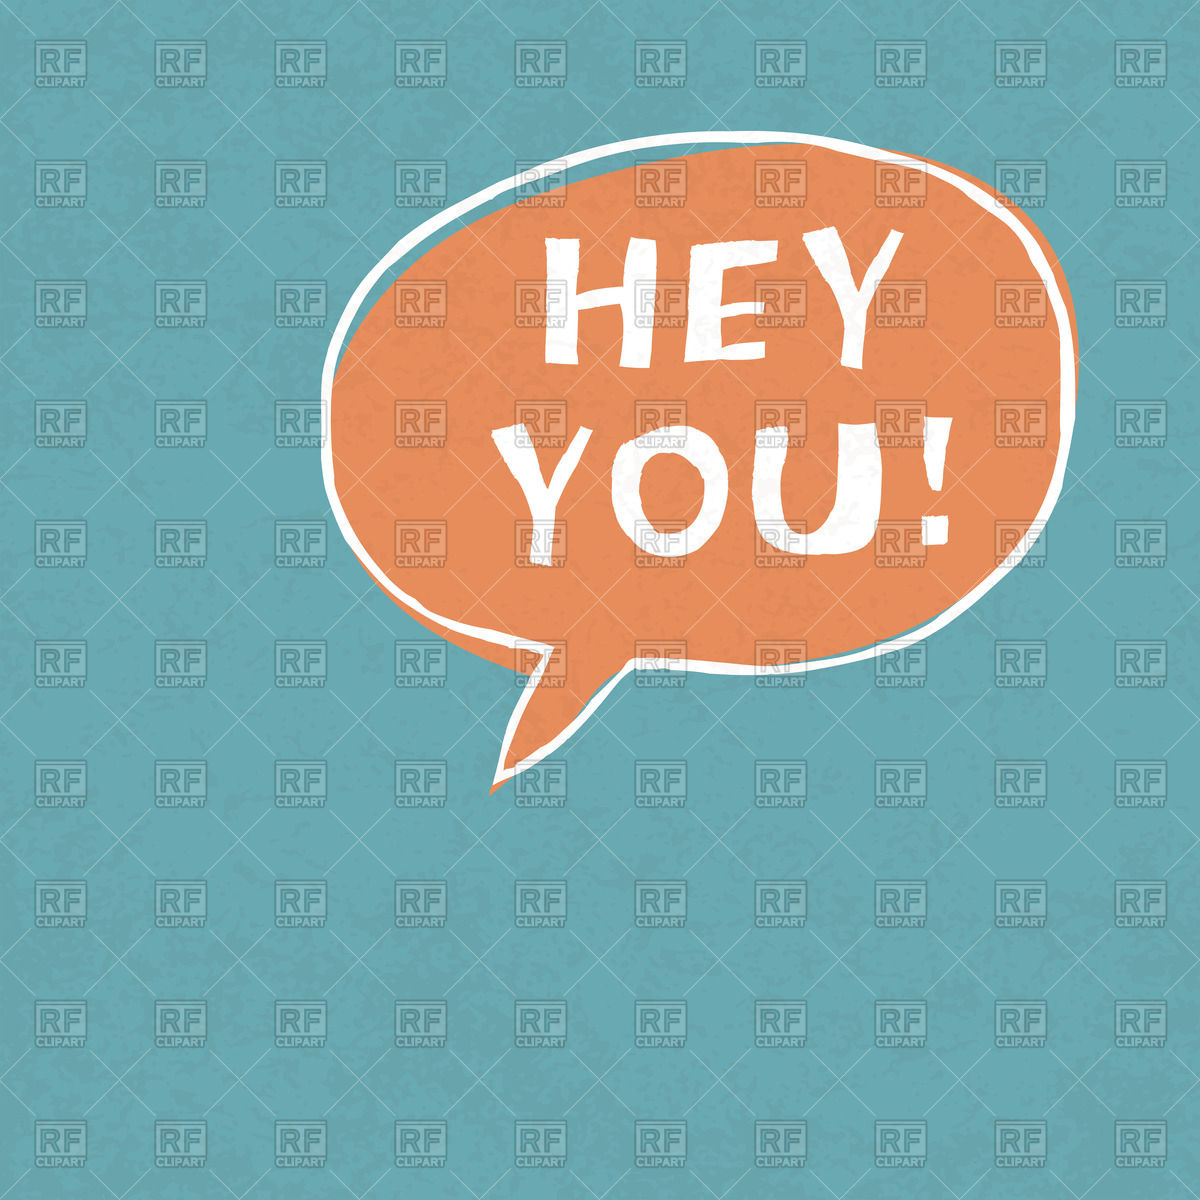 Hey You Words In Speech Bubble   Cartoon Style Download Royalty Free